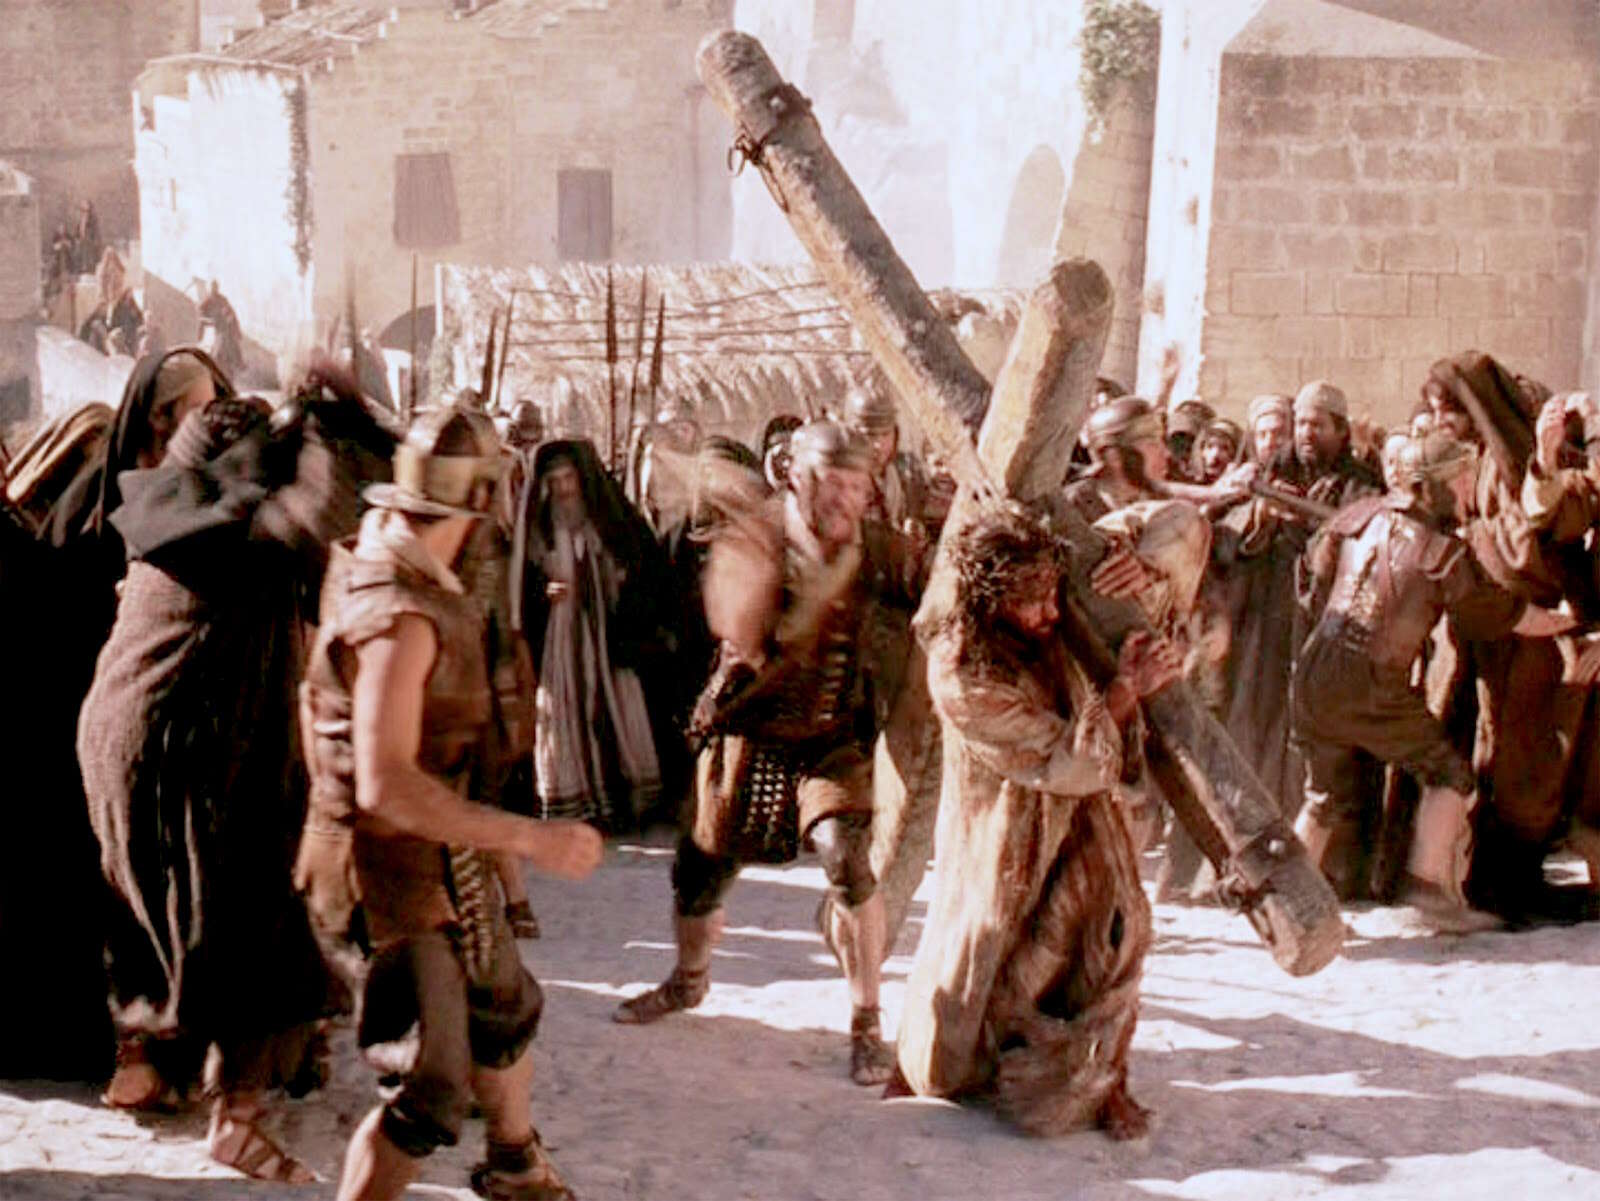 The Passion of the Christ movie